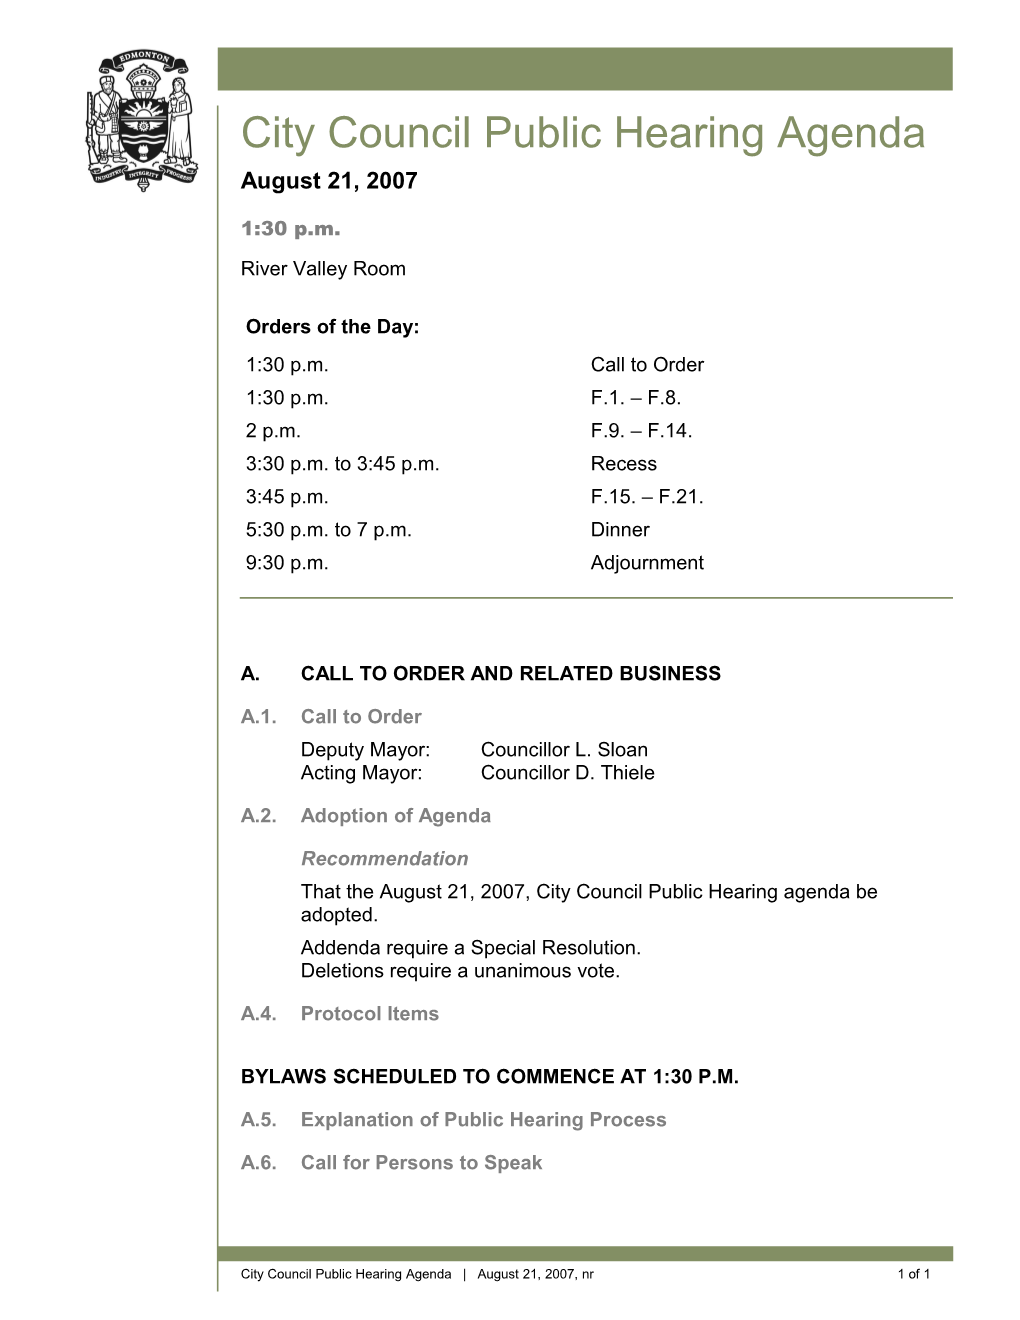 Agenda for City Council August 21, 2007 Meeting